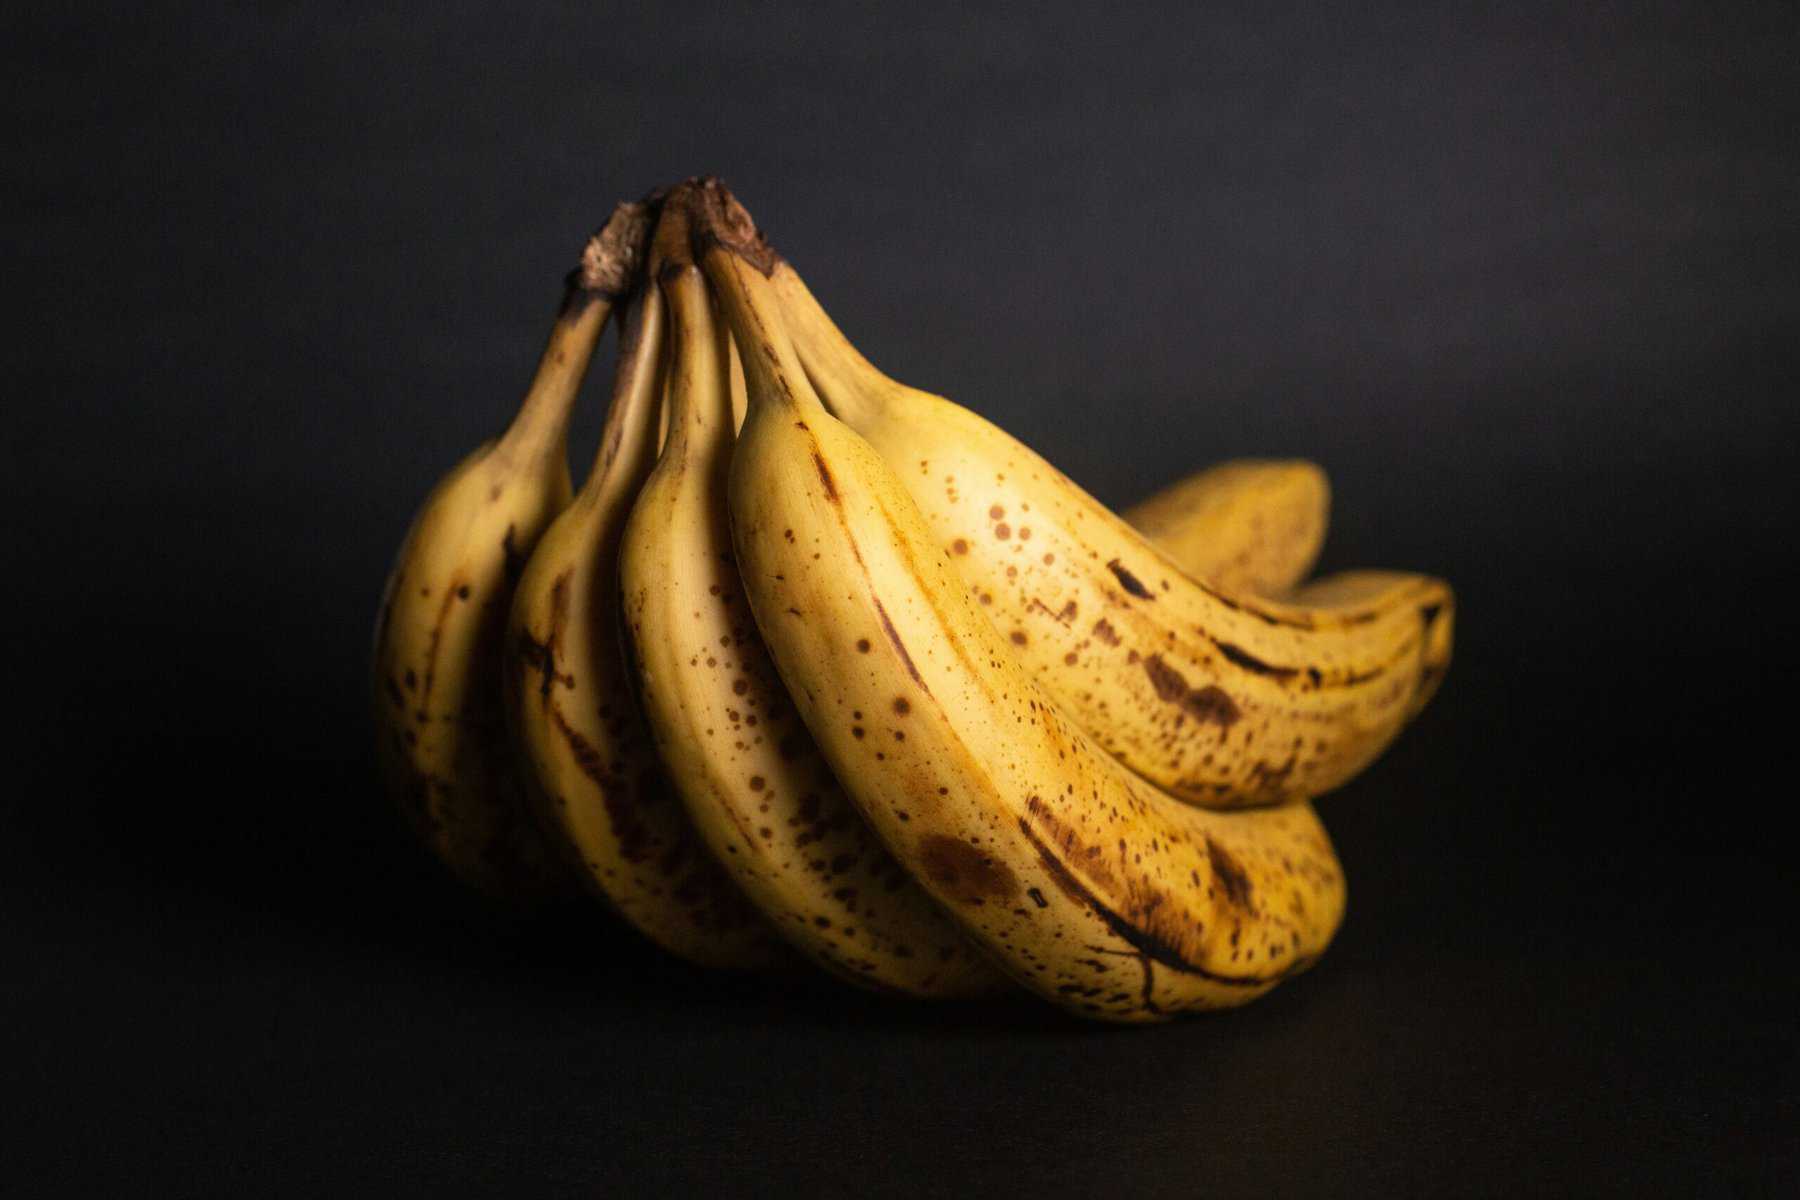 bunch of bruised bananas on black background